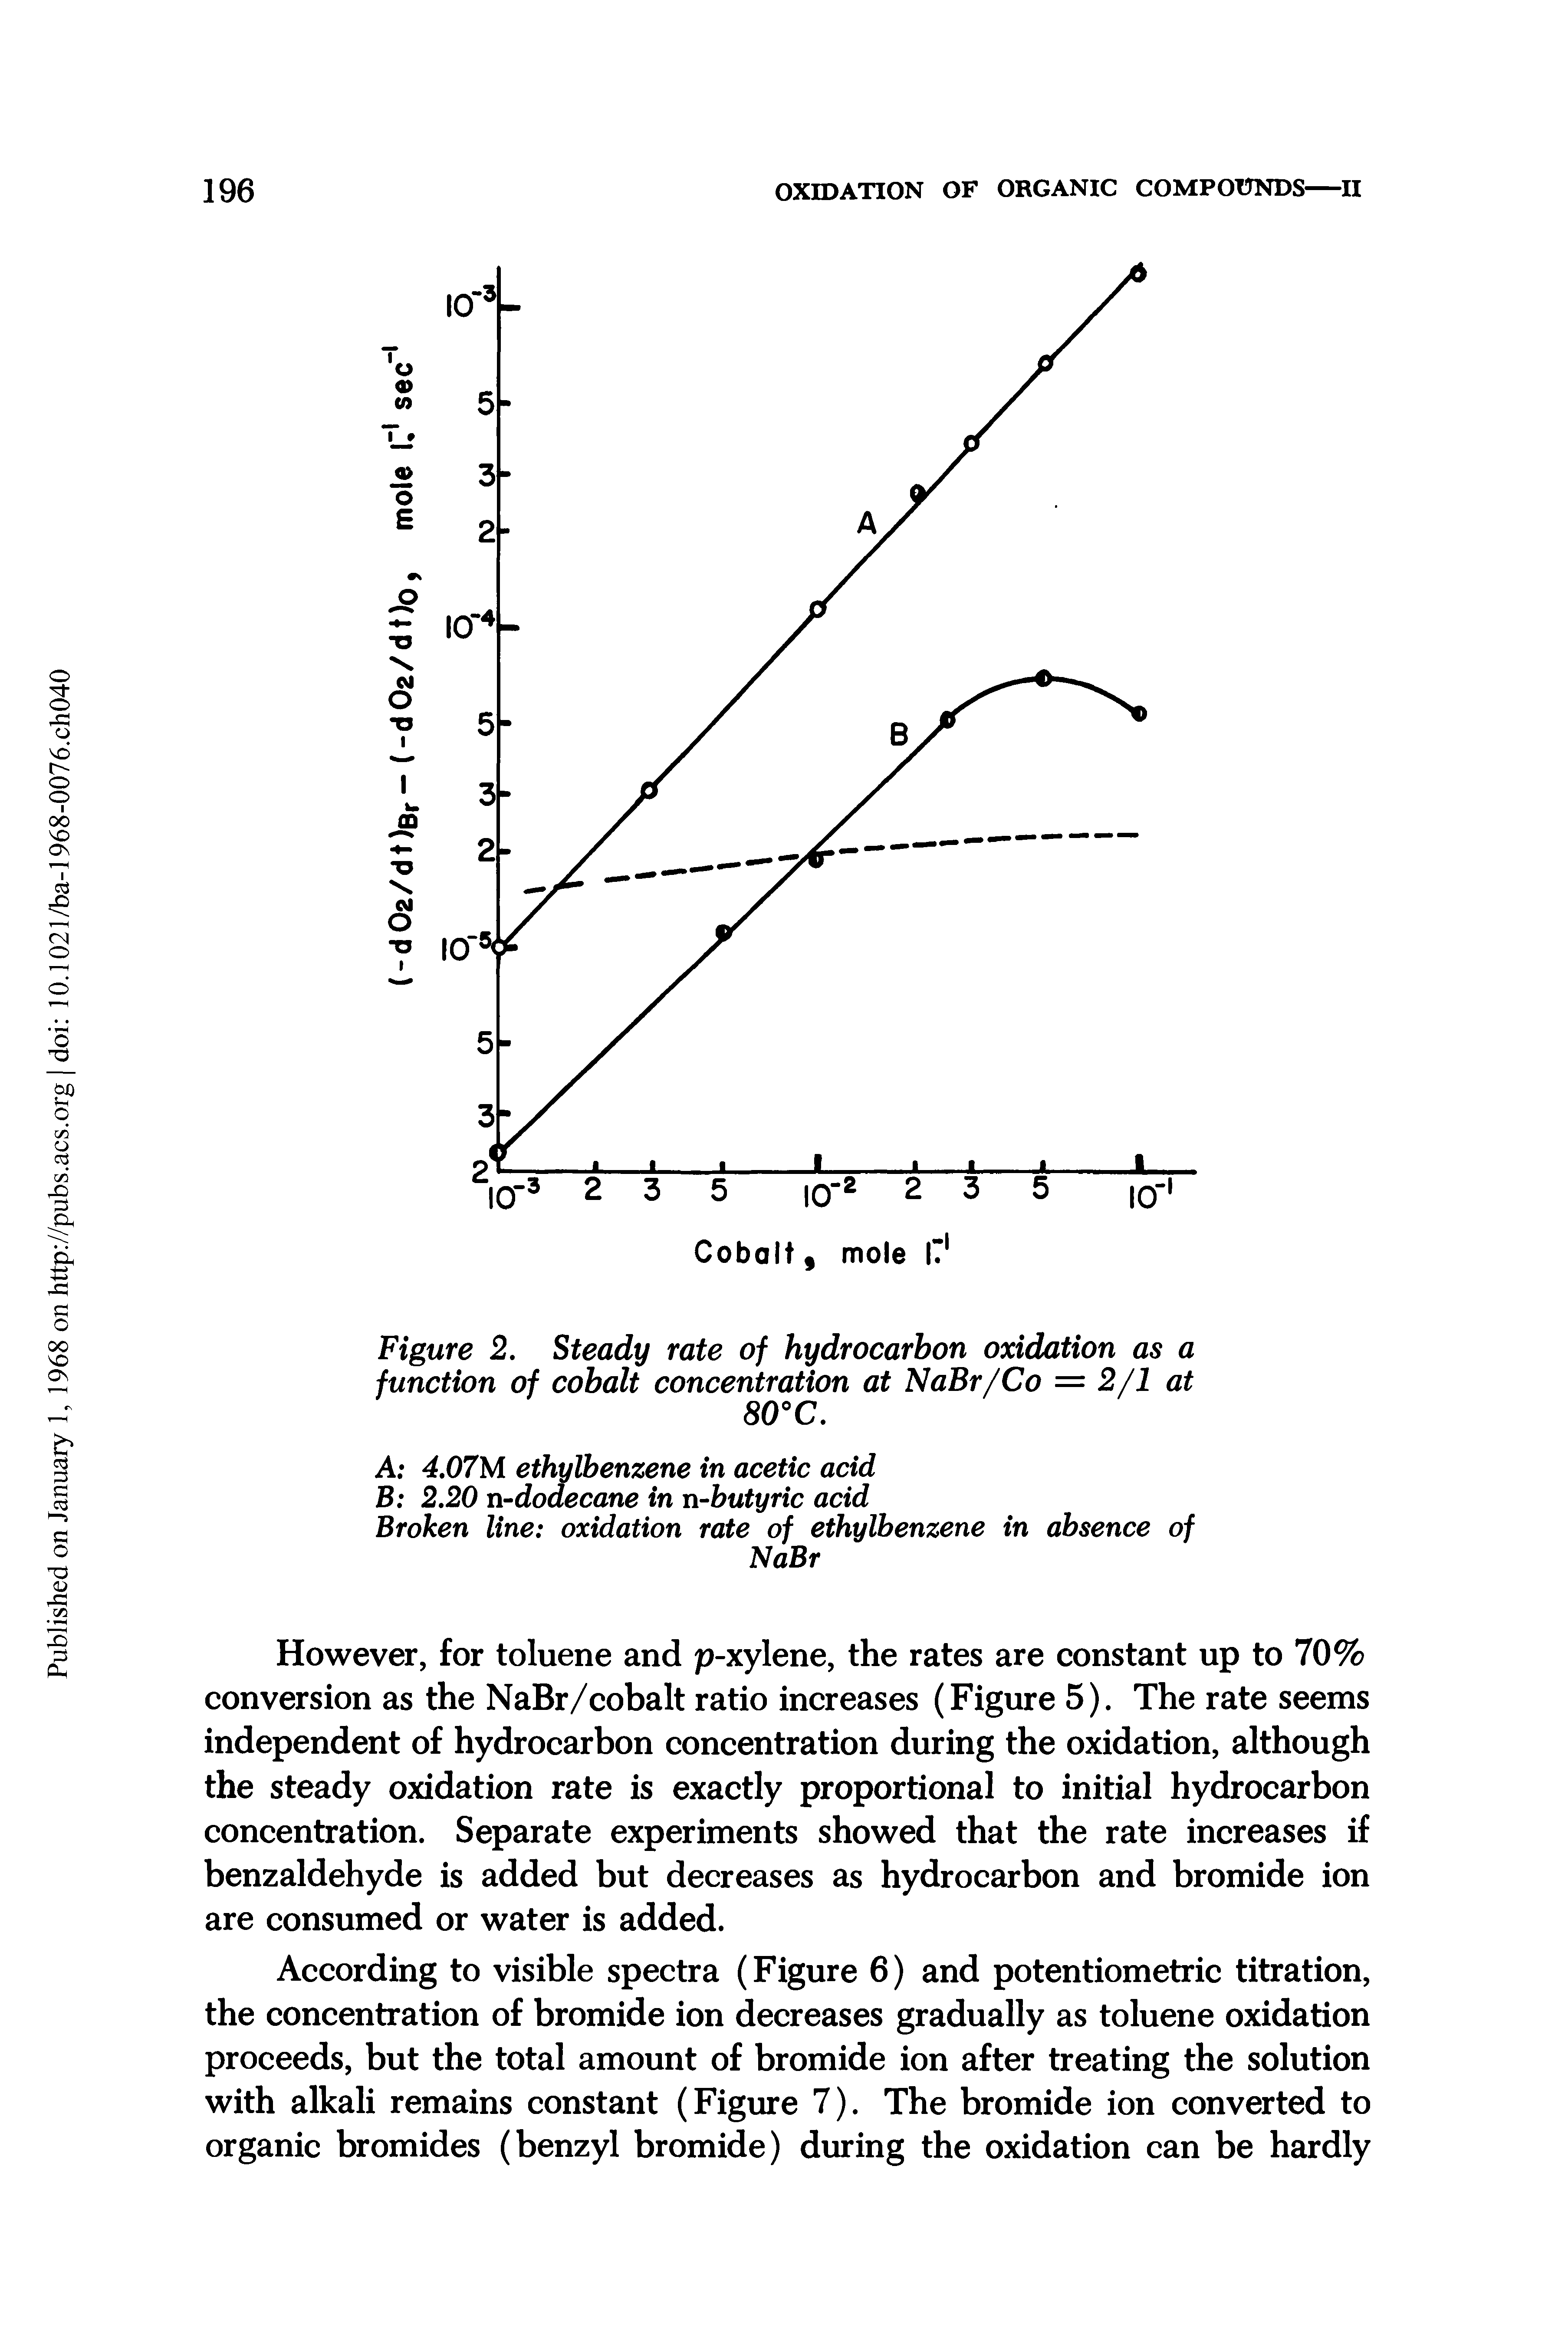 Figure 2. Steady rate of hydrocarbon oxidation as a function of cobalt concentration at NaBr/Co = 2/1 at 80°C.